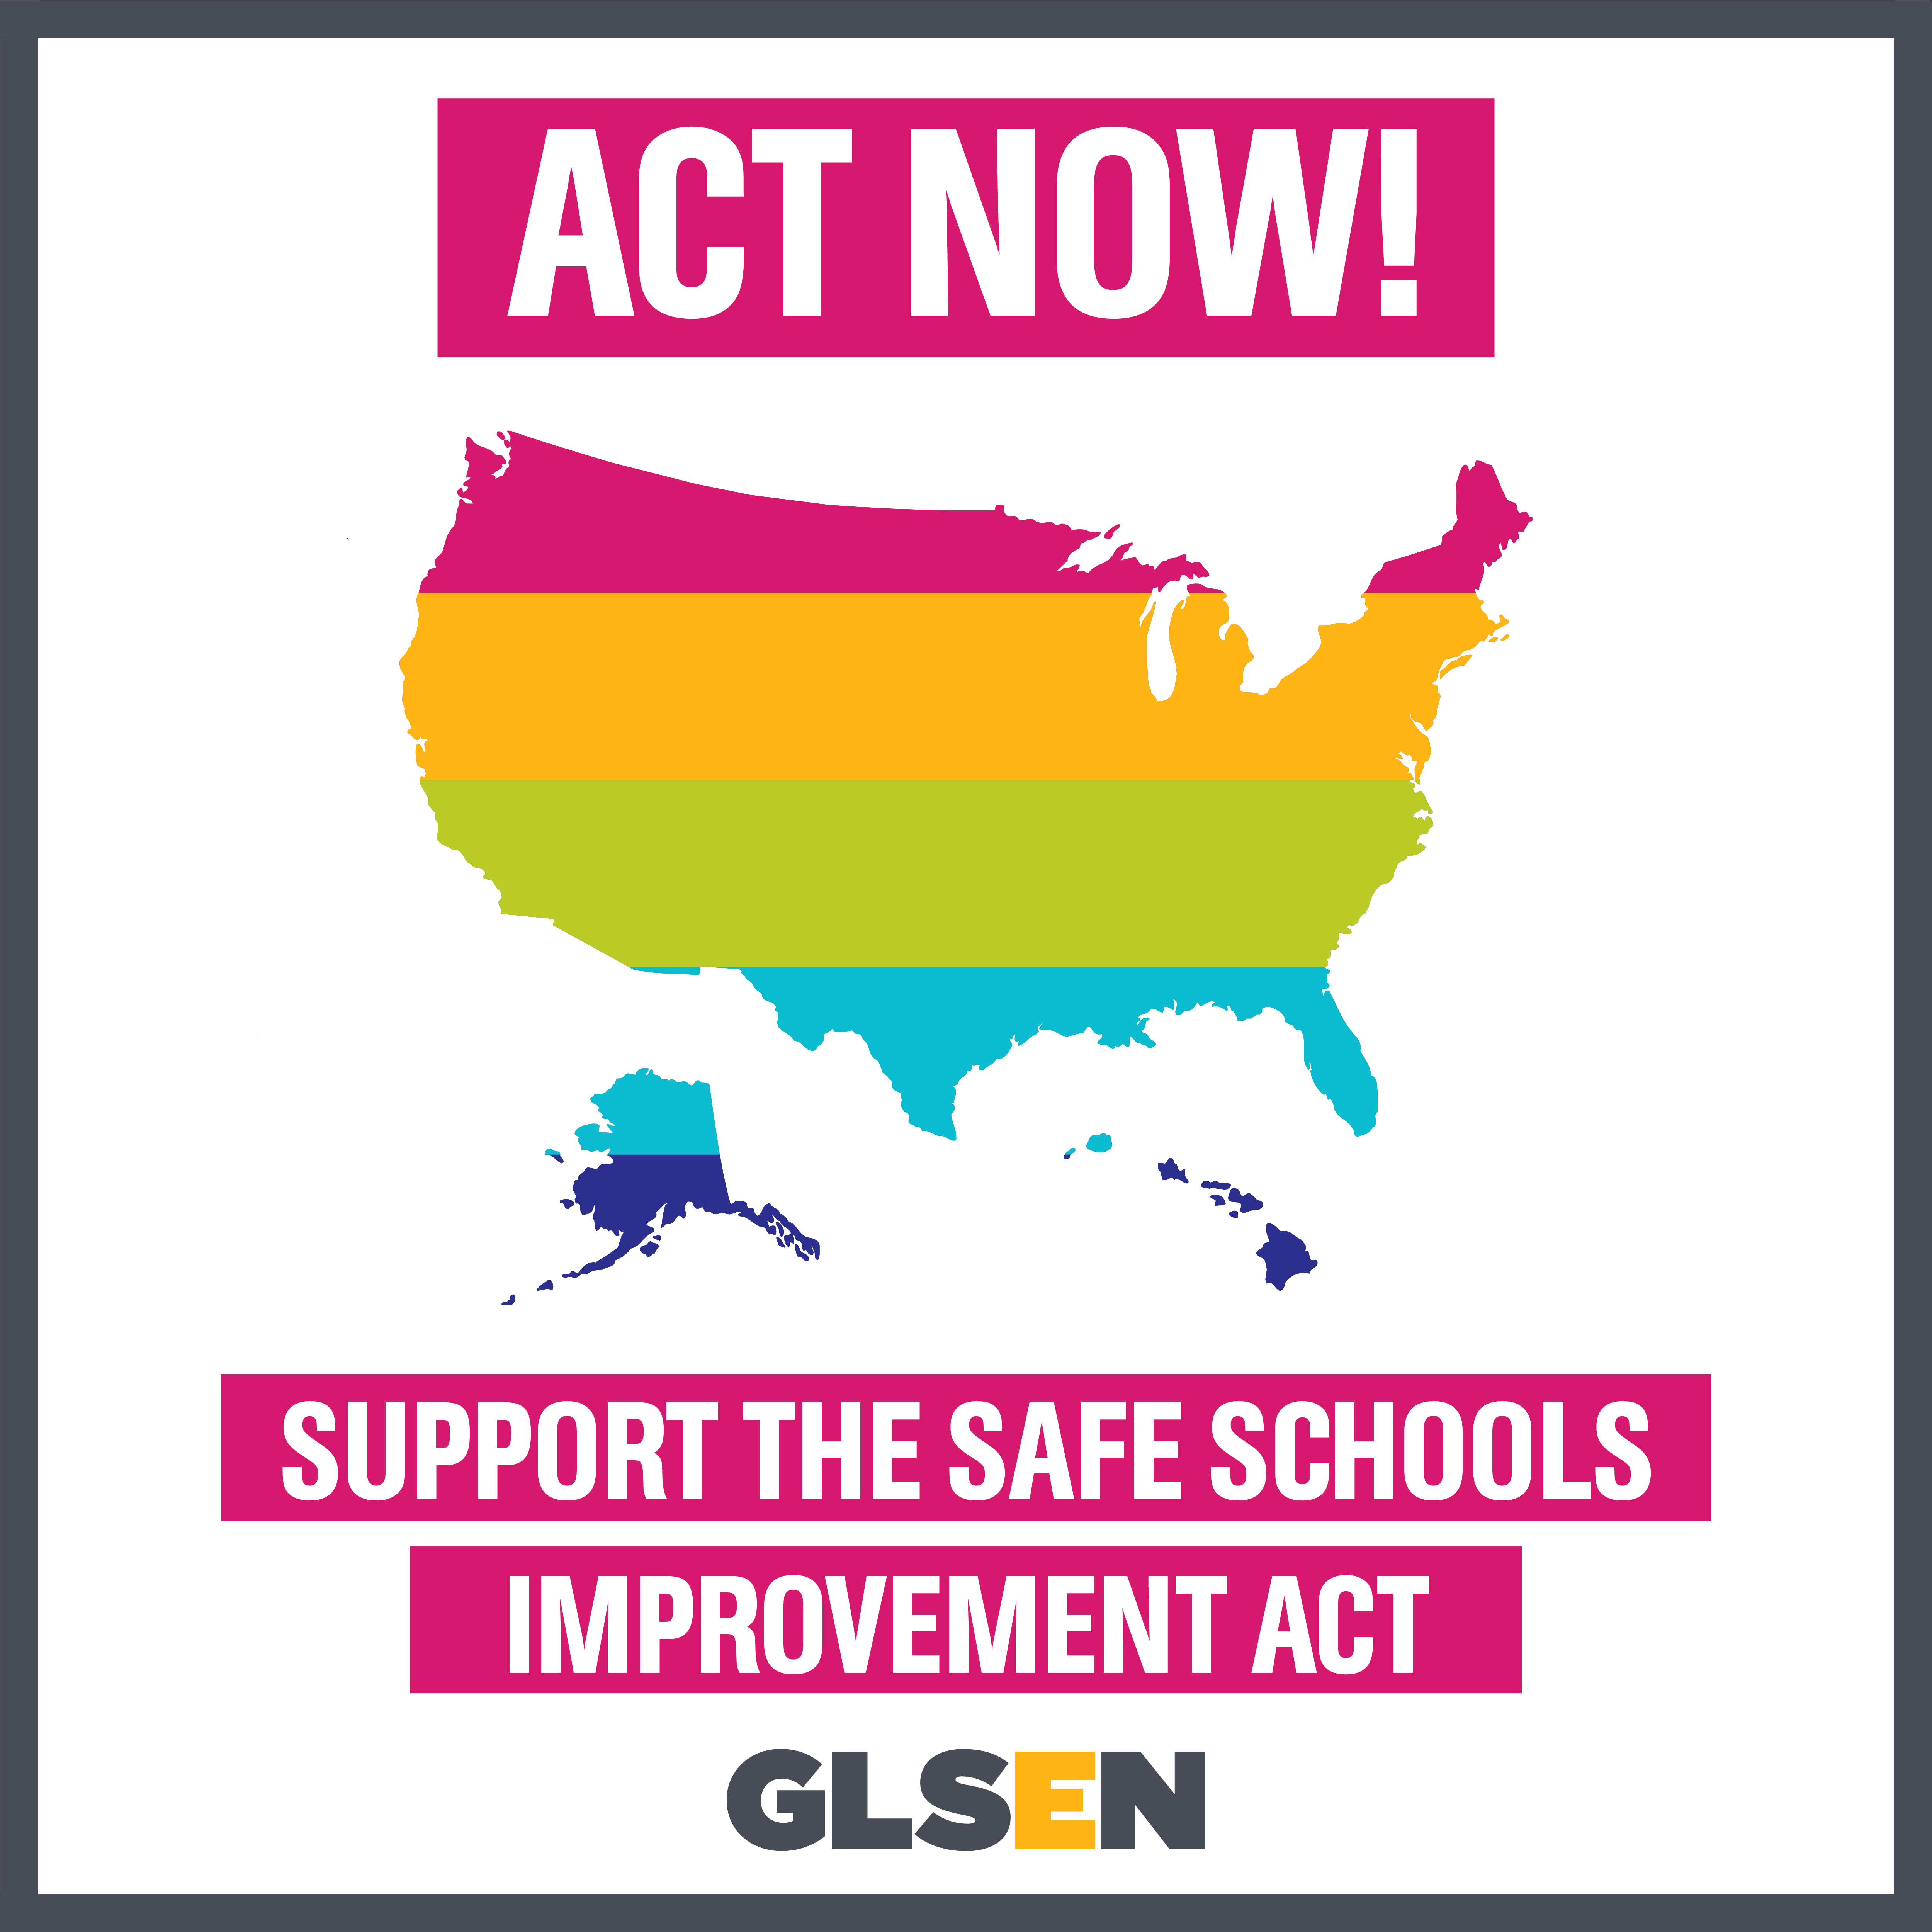 Rainbow Map of the United States with text: Act Now! Support the Safe Schools Improvement Act!